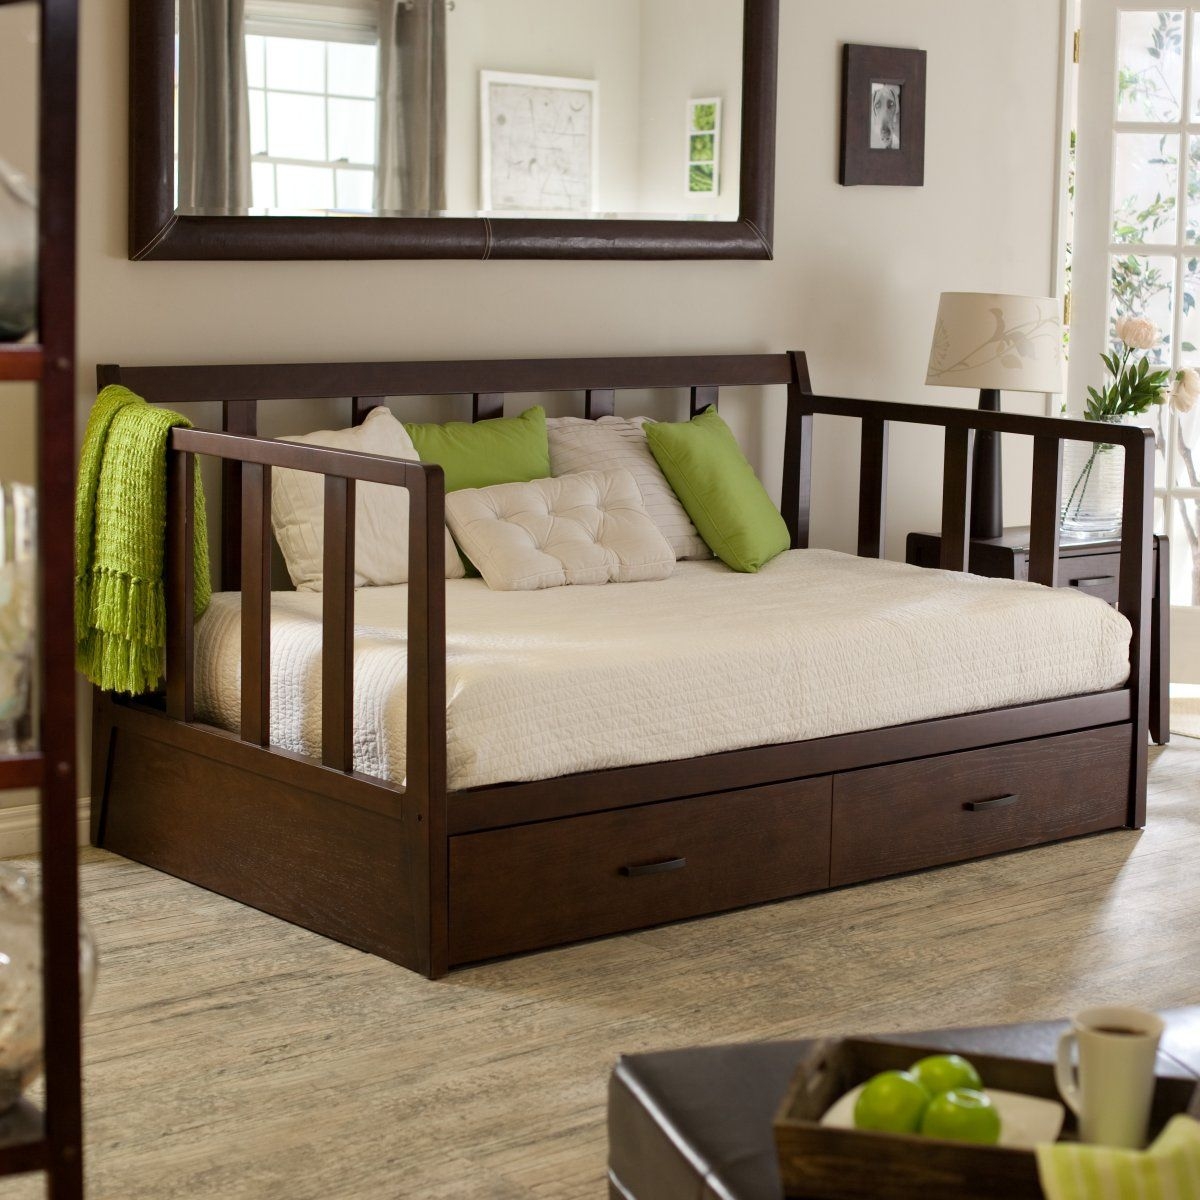 Daybed trundle storage